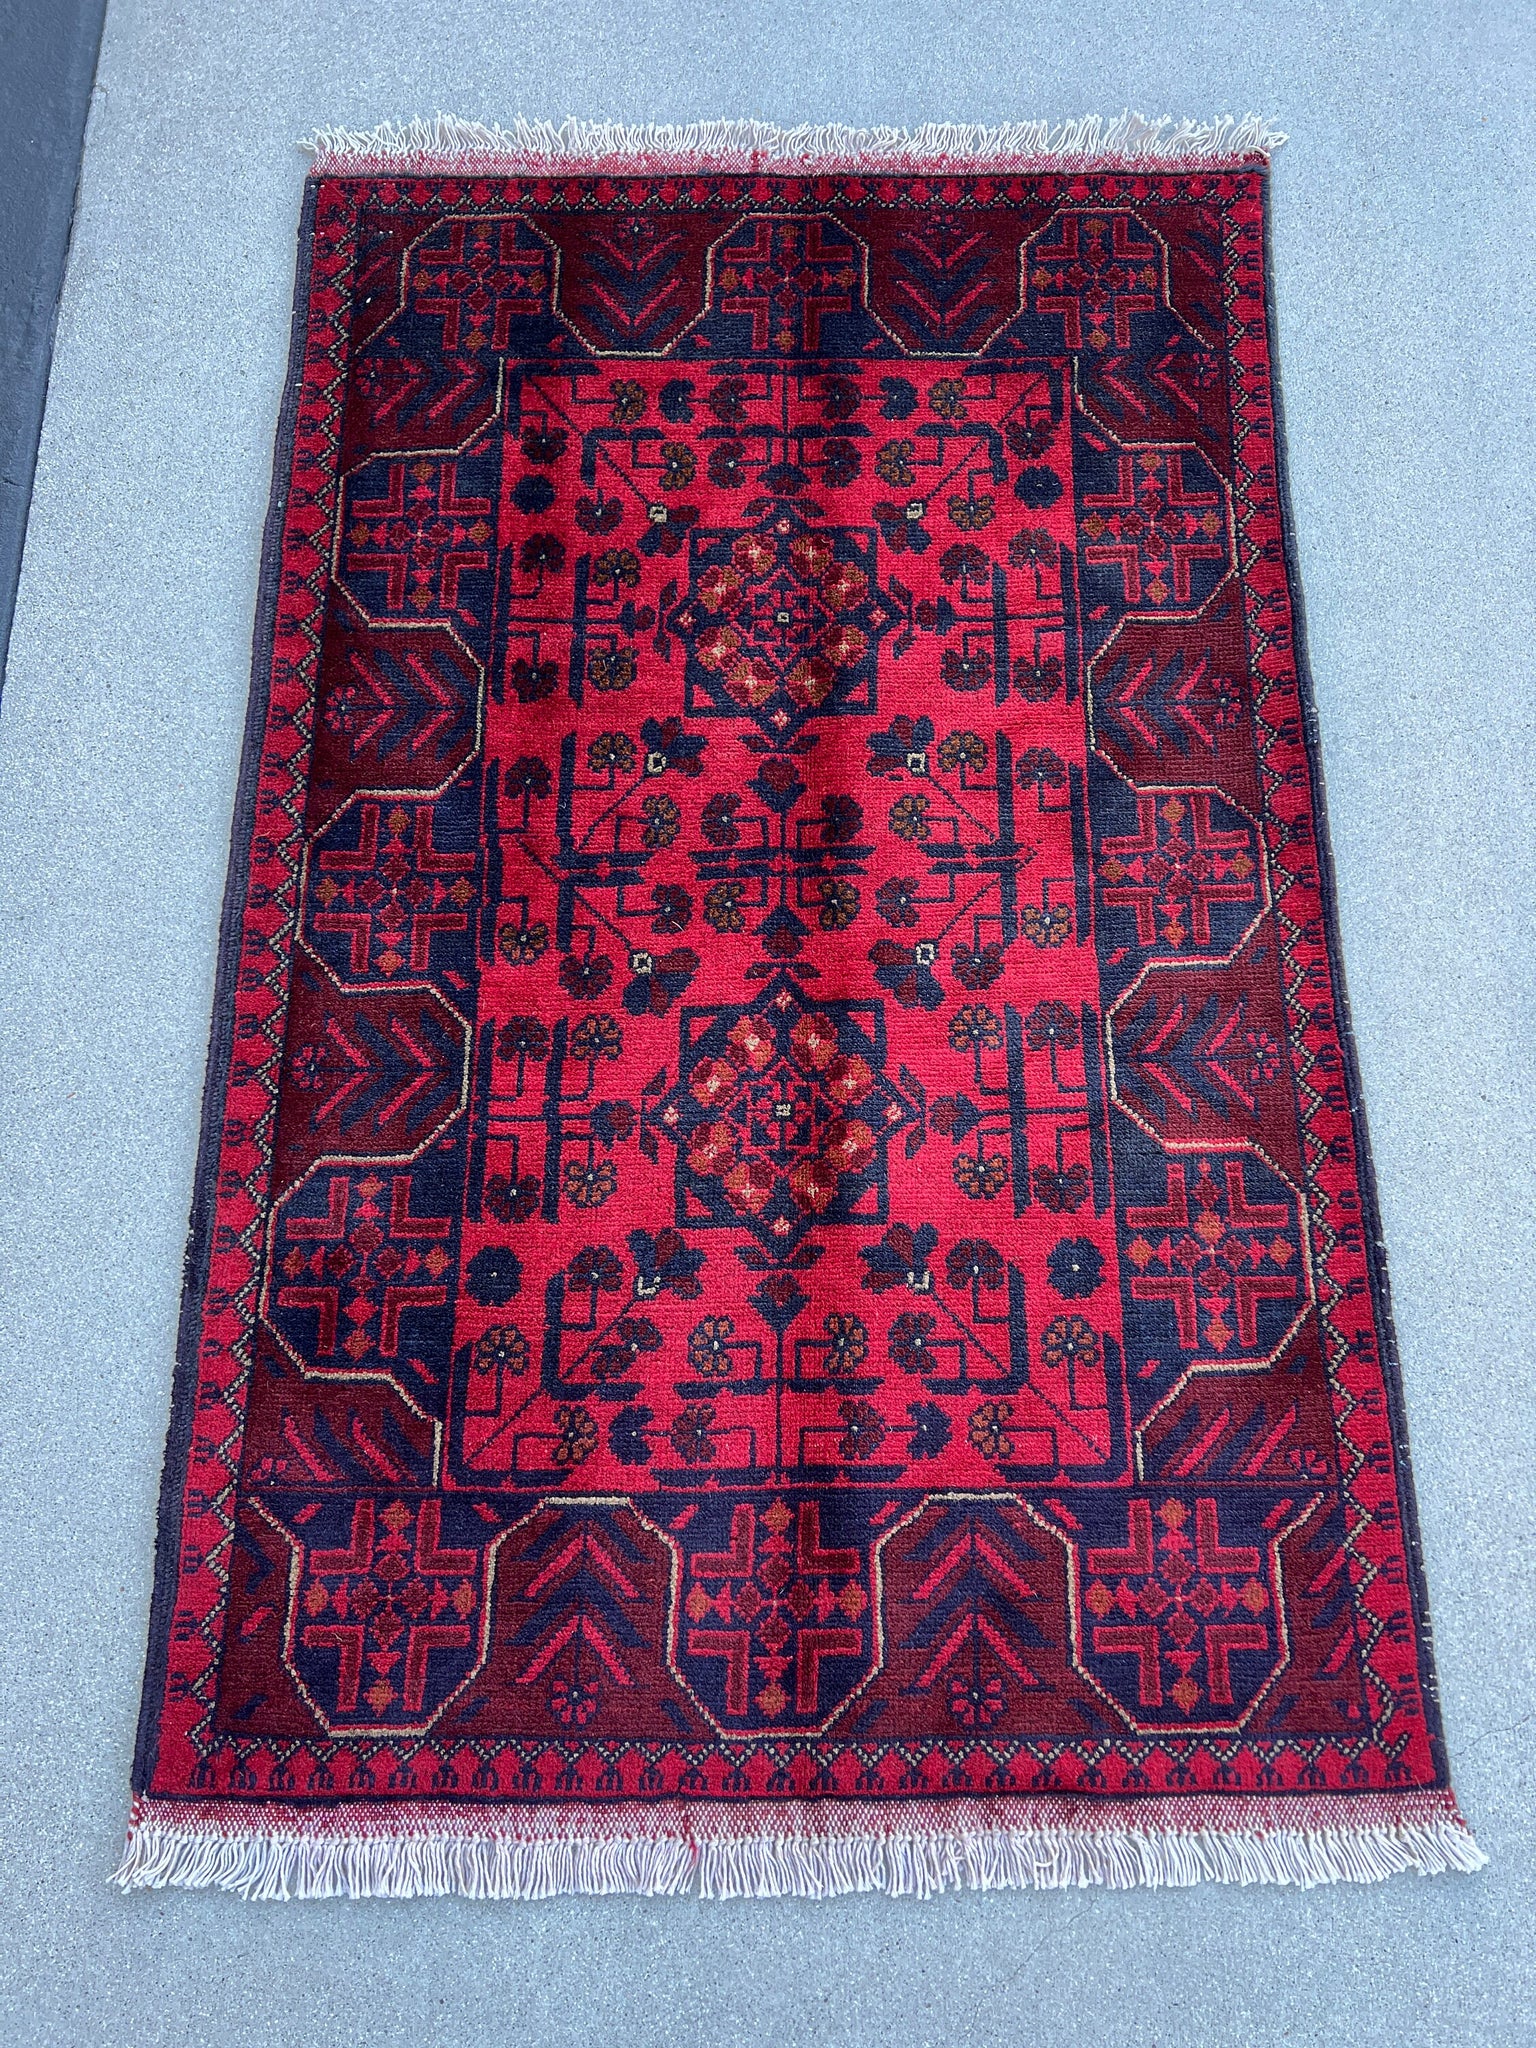 Sara - 3x4 Area Rug - The Rug Mine - Free Shipping Worldwide - Authentic  Oriental Rugs